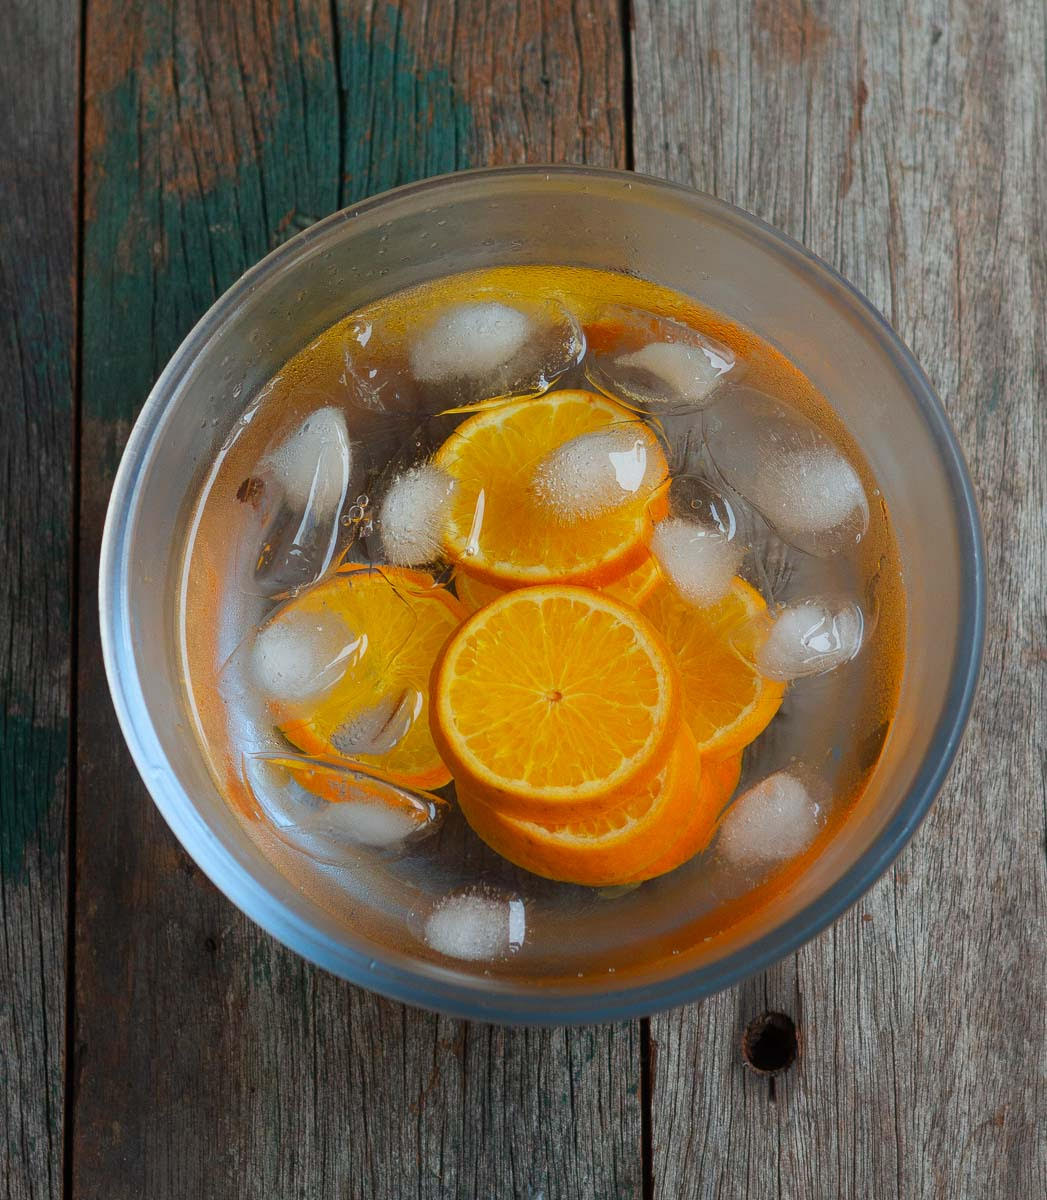 Place the blanched orange slices in iced water